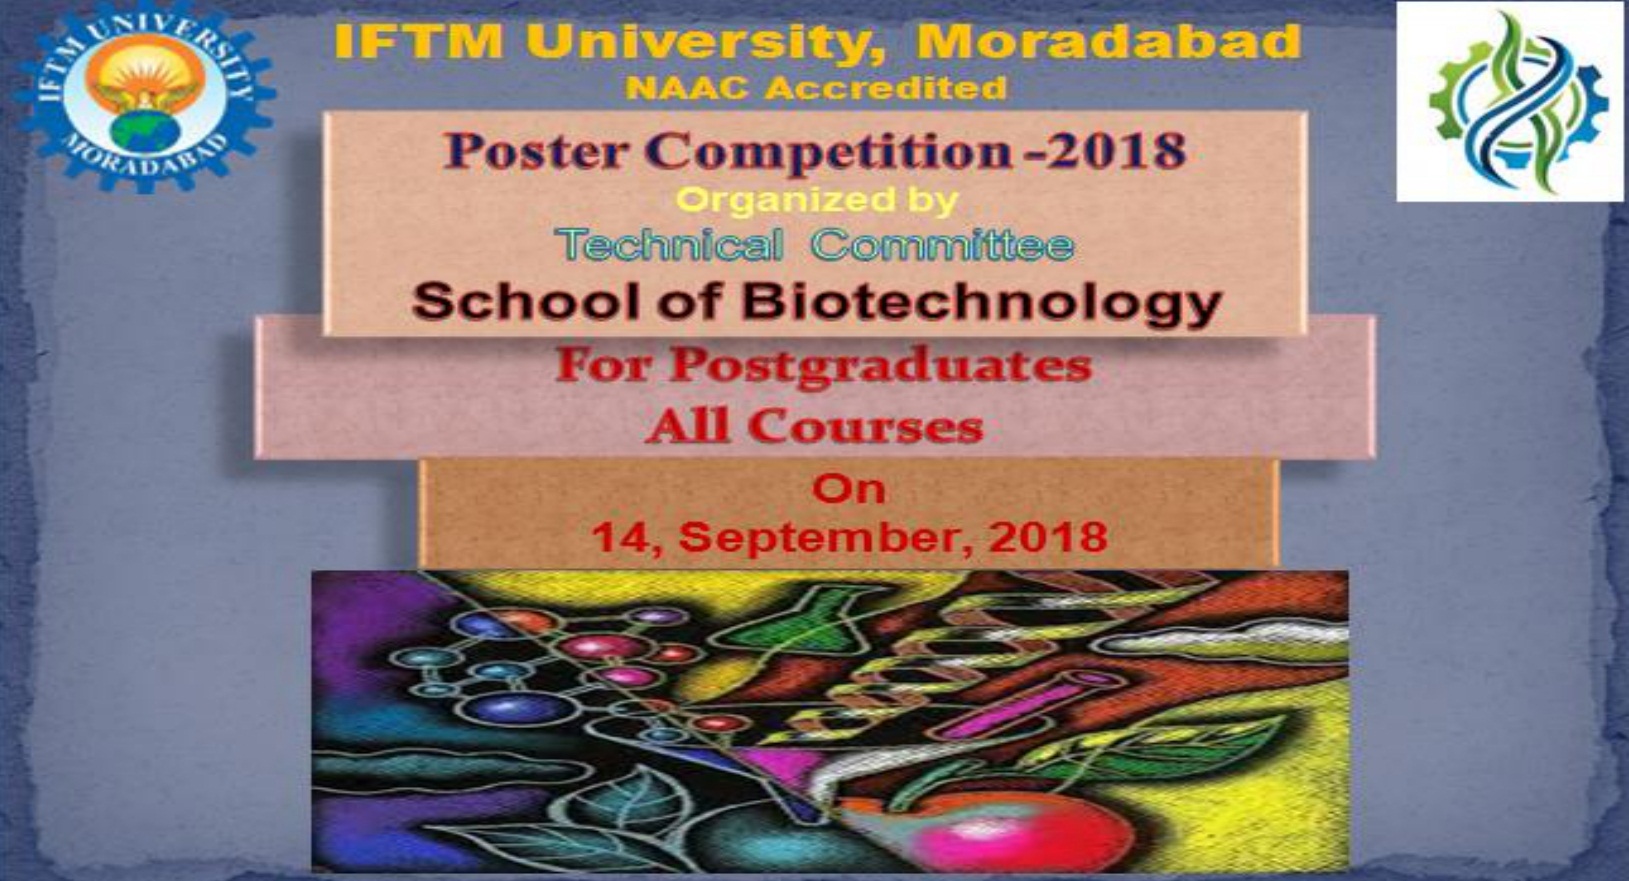 Poster Competition-2018